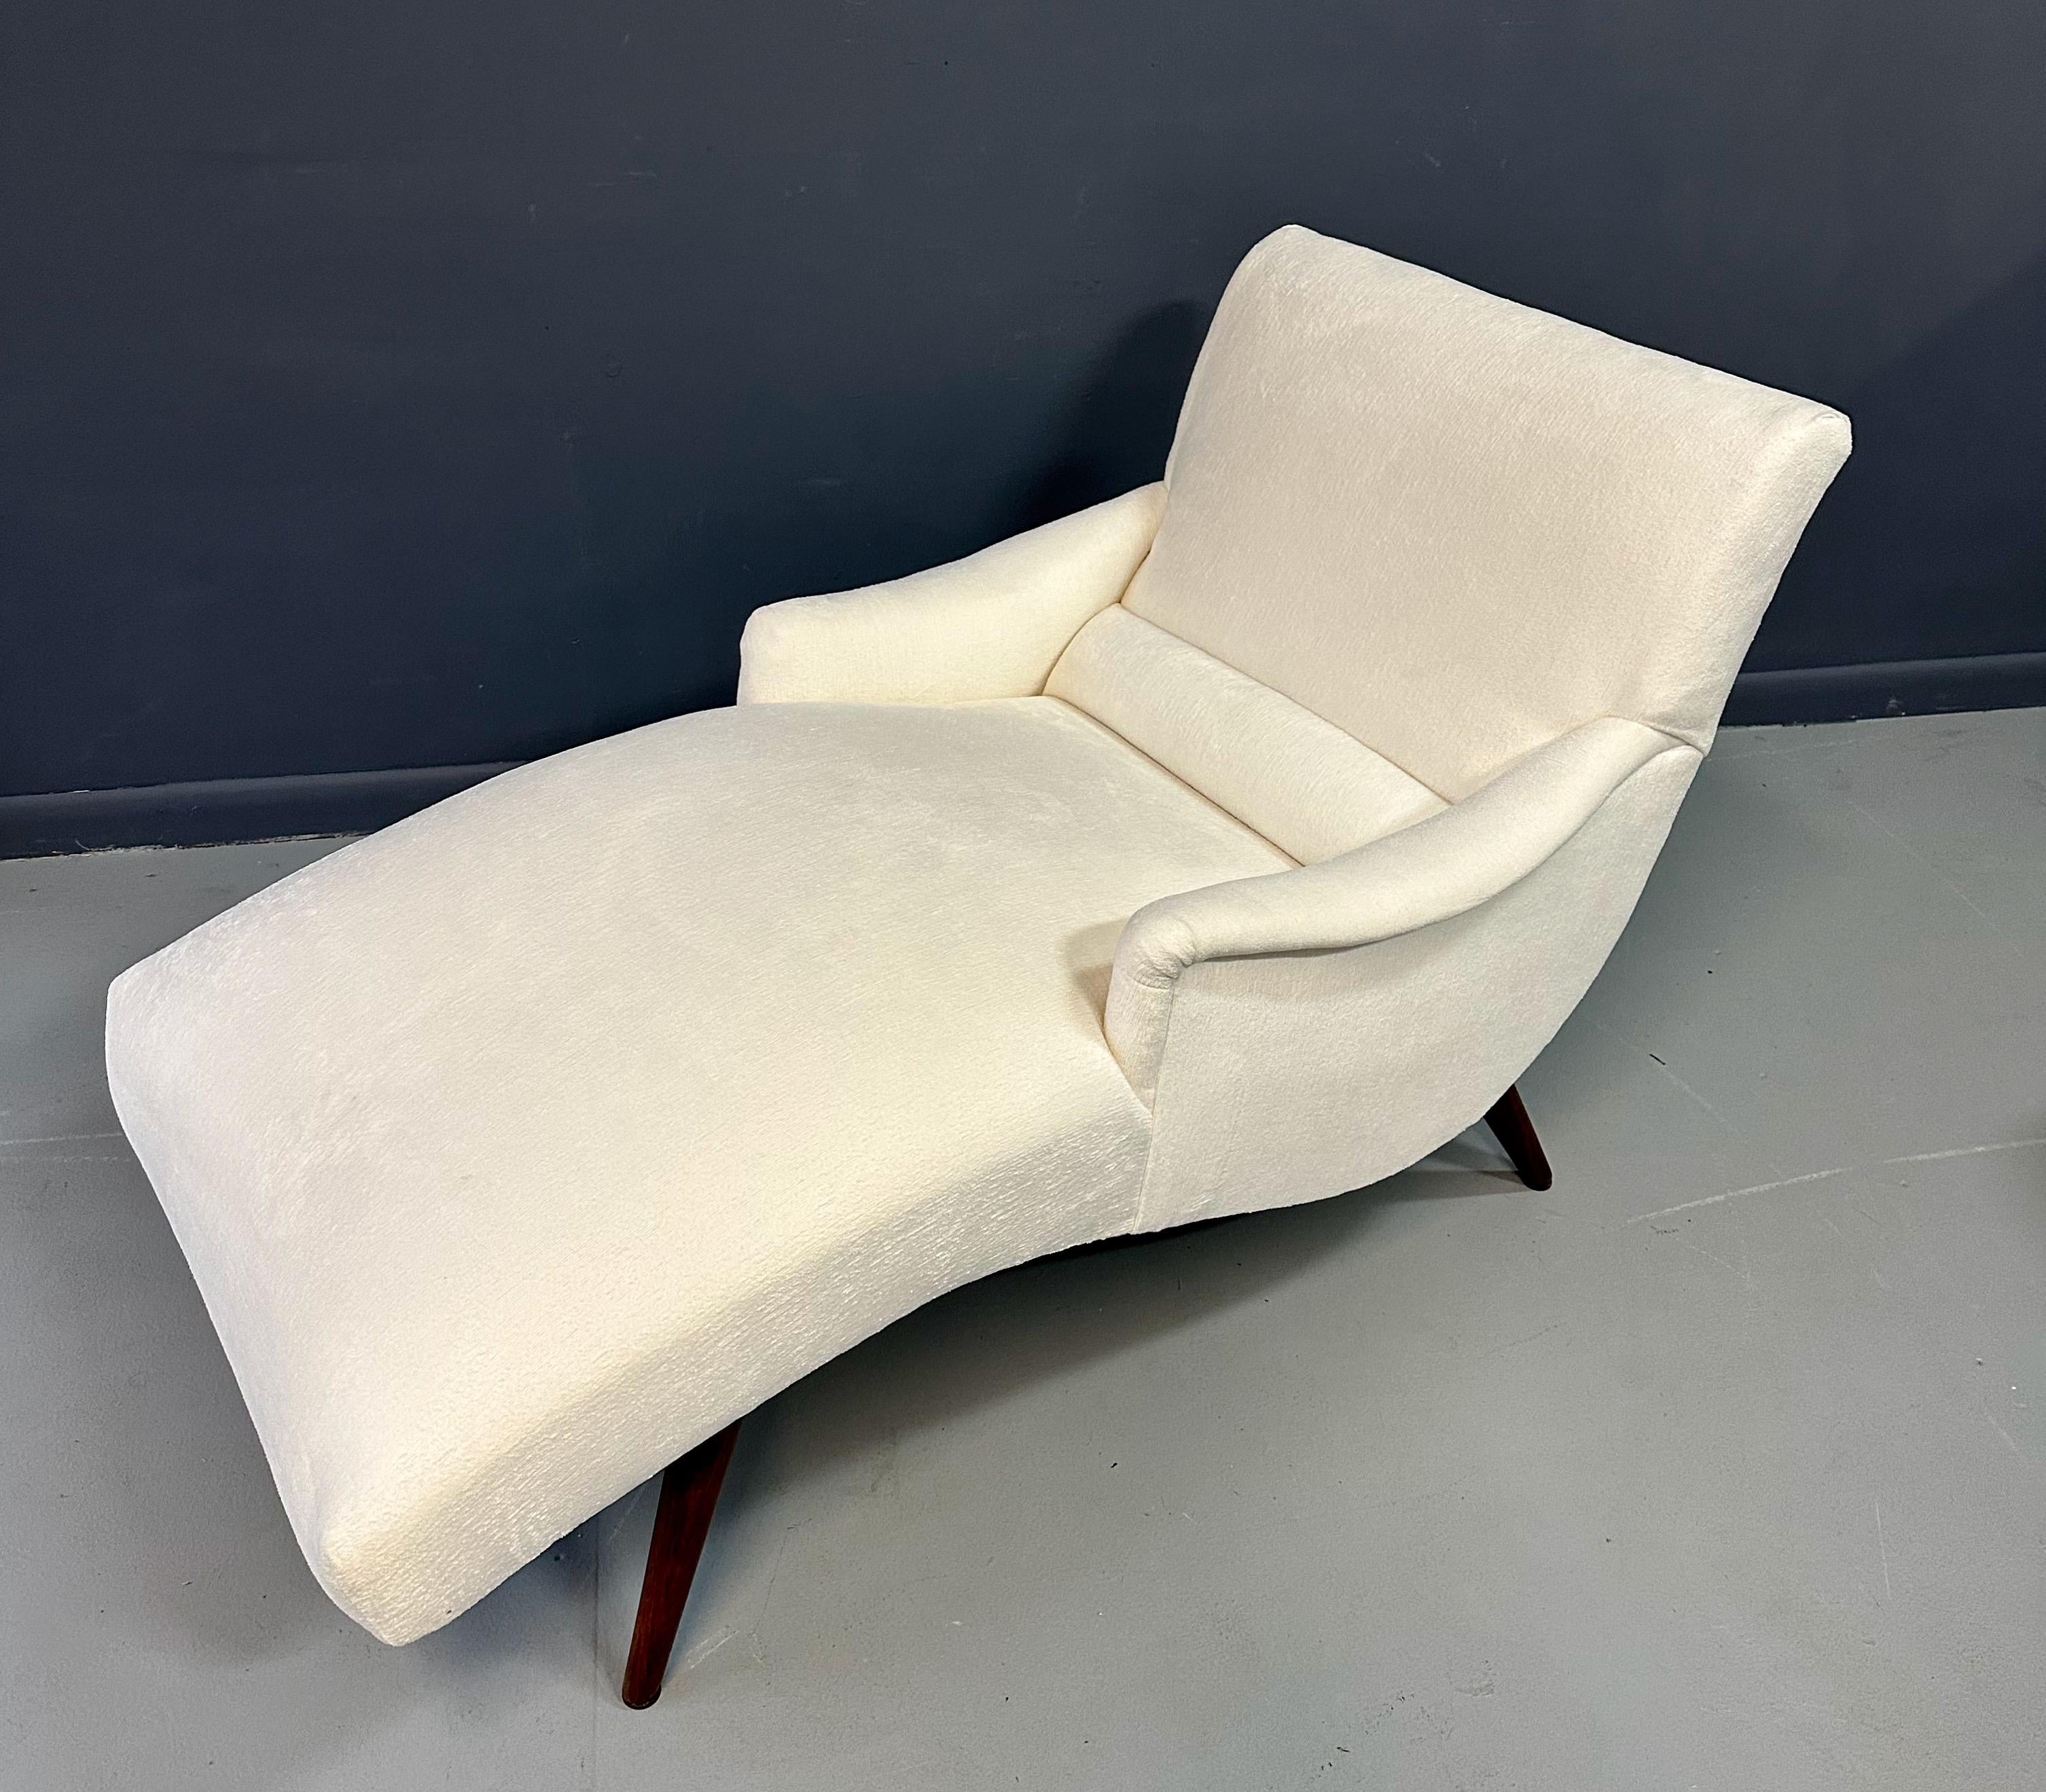 North American Mid-Century Modern Chaise Lounge Chair by Lawrence Peabody